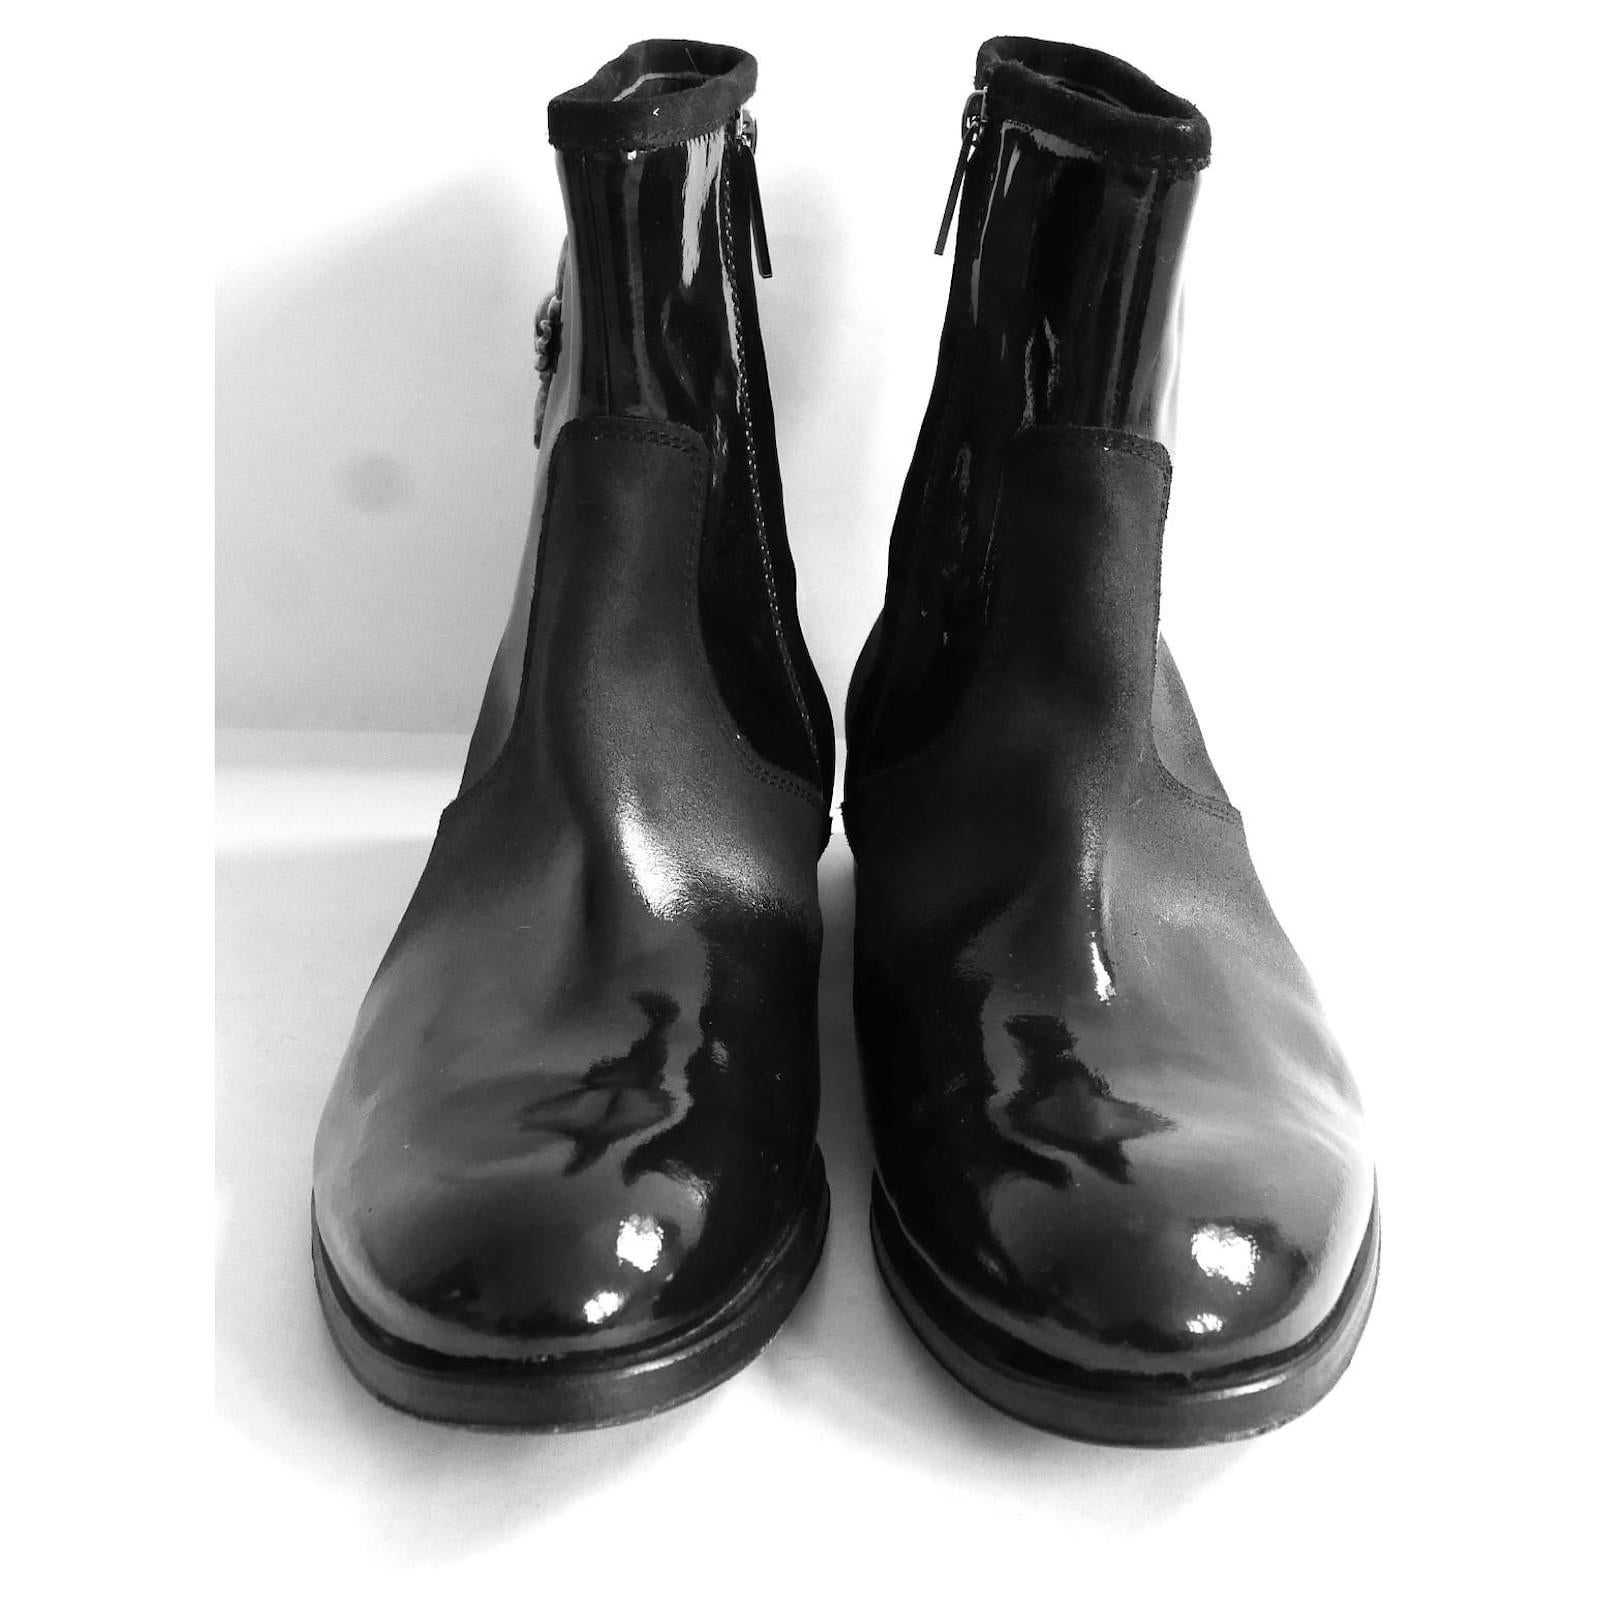 Super cool Philipp Plein ombre leather boots. bought for £900 and unworn. 
Made from black matte to patent ombre leather with chunky skull detailing, side zips and silvertone logo plaque to back. Size 40. Measure approx - heel to toe 11”.5
